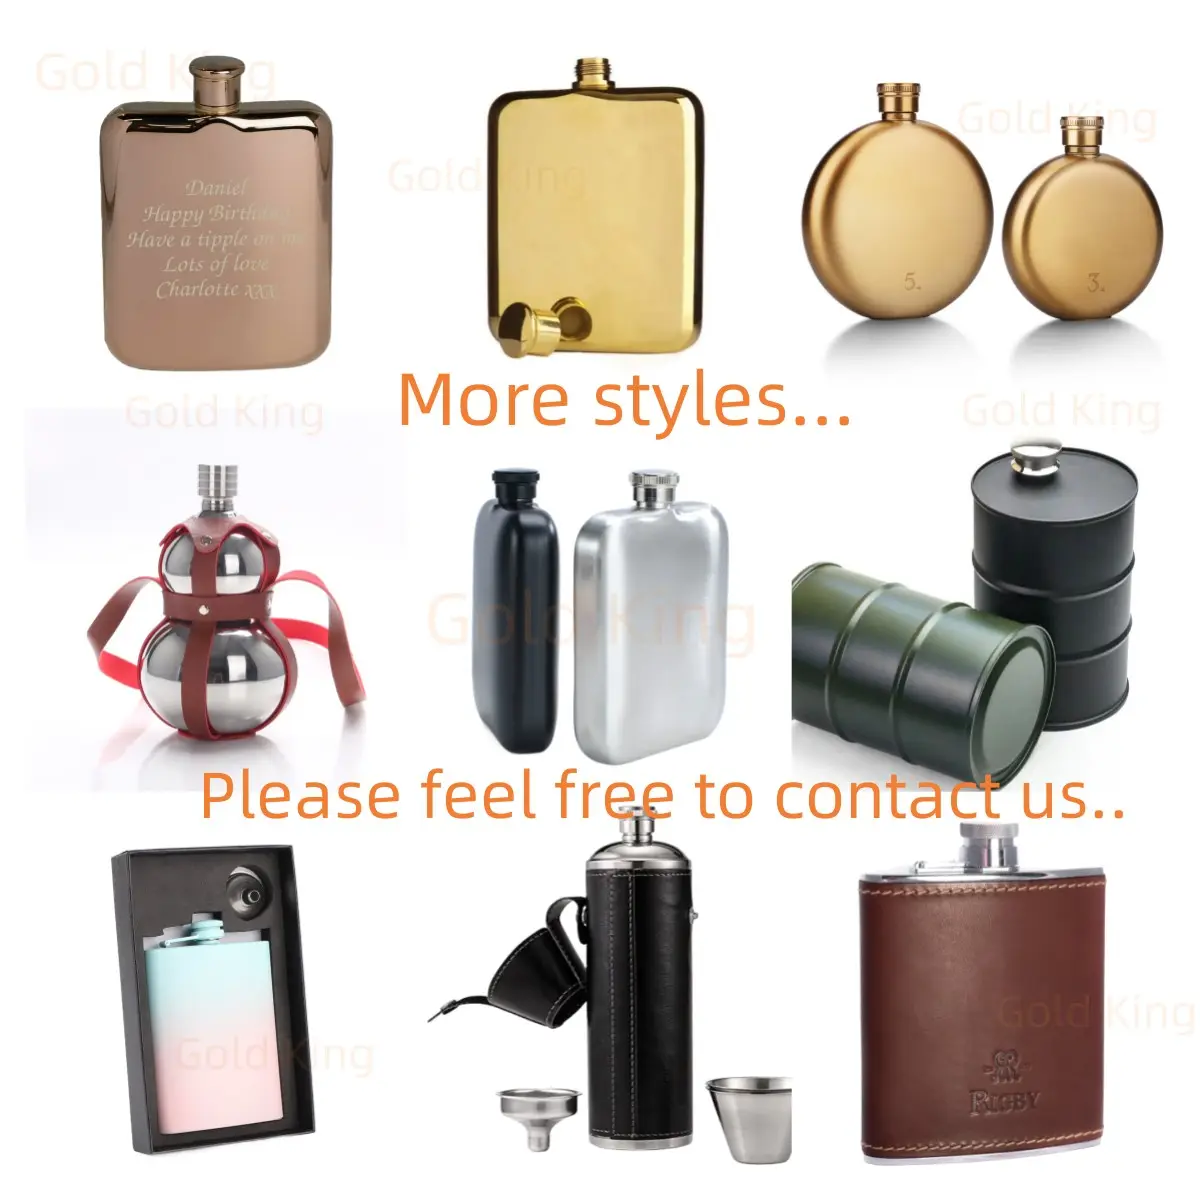 Gold Hip Flask Pocket Flagon Camping Wine Pot Stainless Steel 6oz Metal Whisky Flask